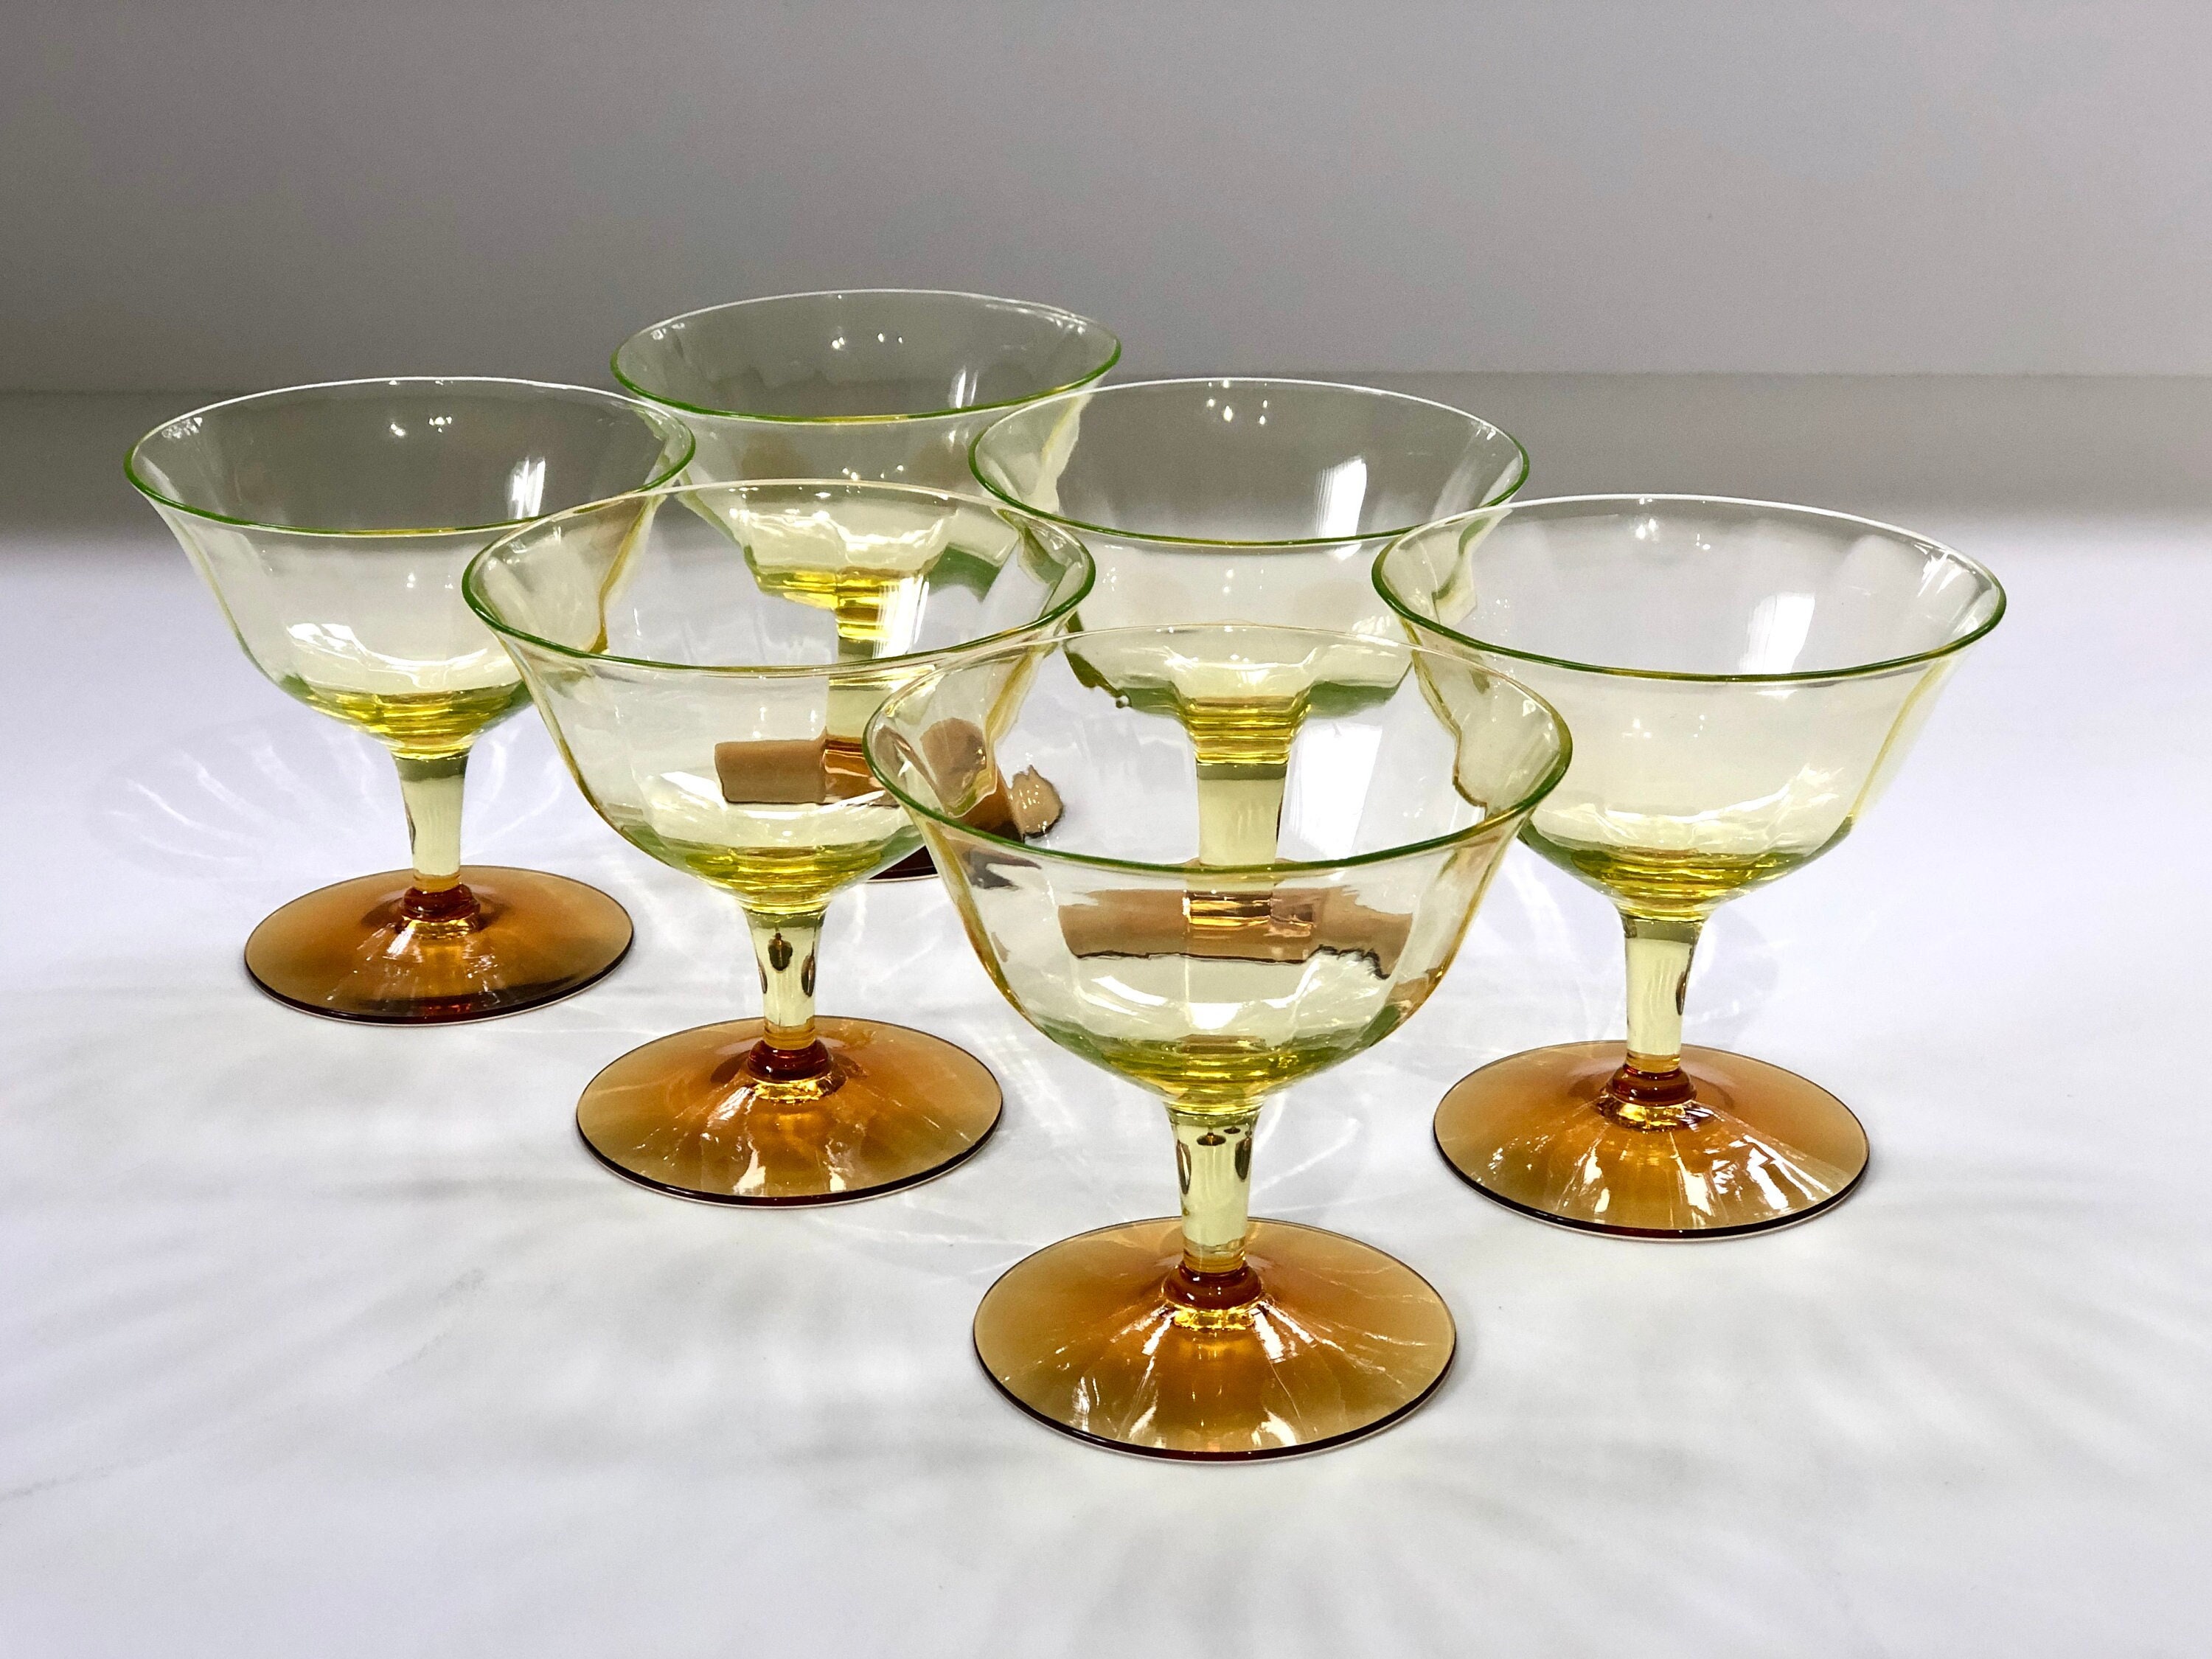 Champagne Flutes, Set of 4 Champagne Glasses Stemmed Toasting Drinkware  with Decorative Brass Metal Hammered Style Base